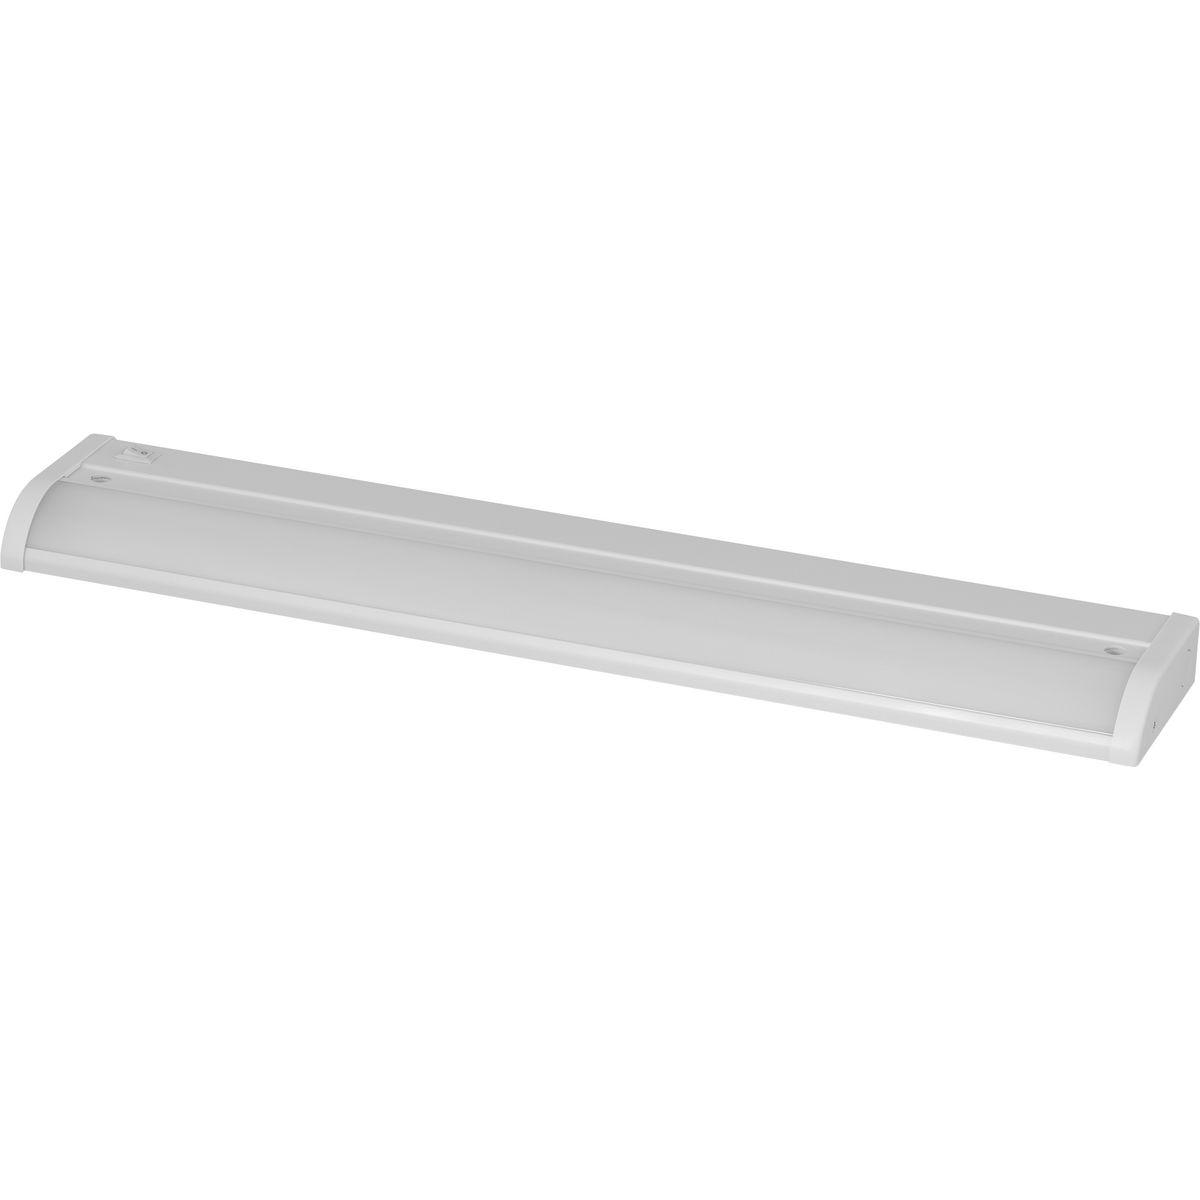 Hubbell P700002-028-30 The HIDE-A-LITE V 17-1/2" linear undercabinet fixture provides the ideal solution for residential and light commercial applications. Extruded aluminum construction featuring a lens design to optimizes light distribution to ensure proper illumination. The 